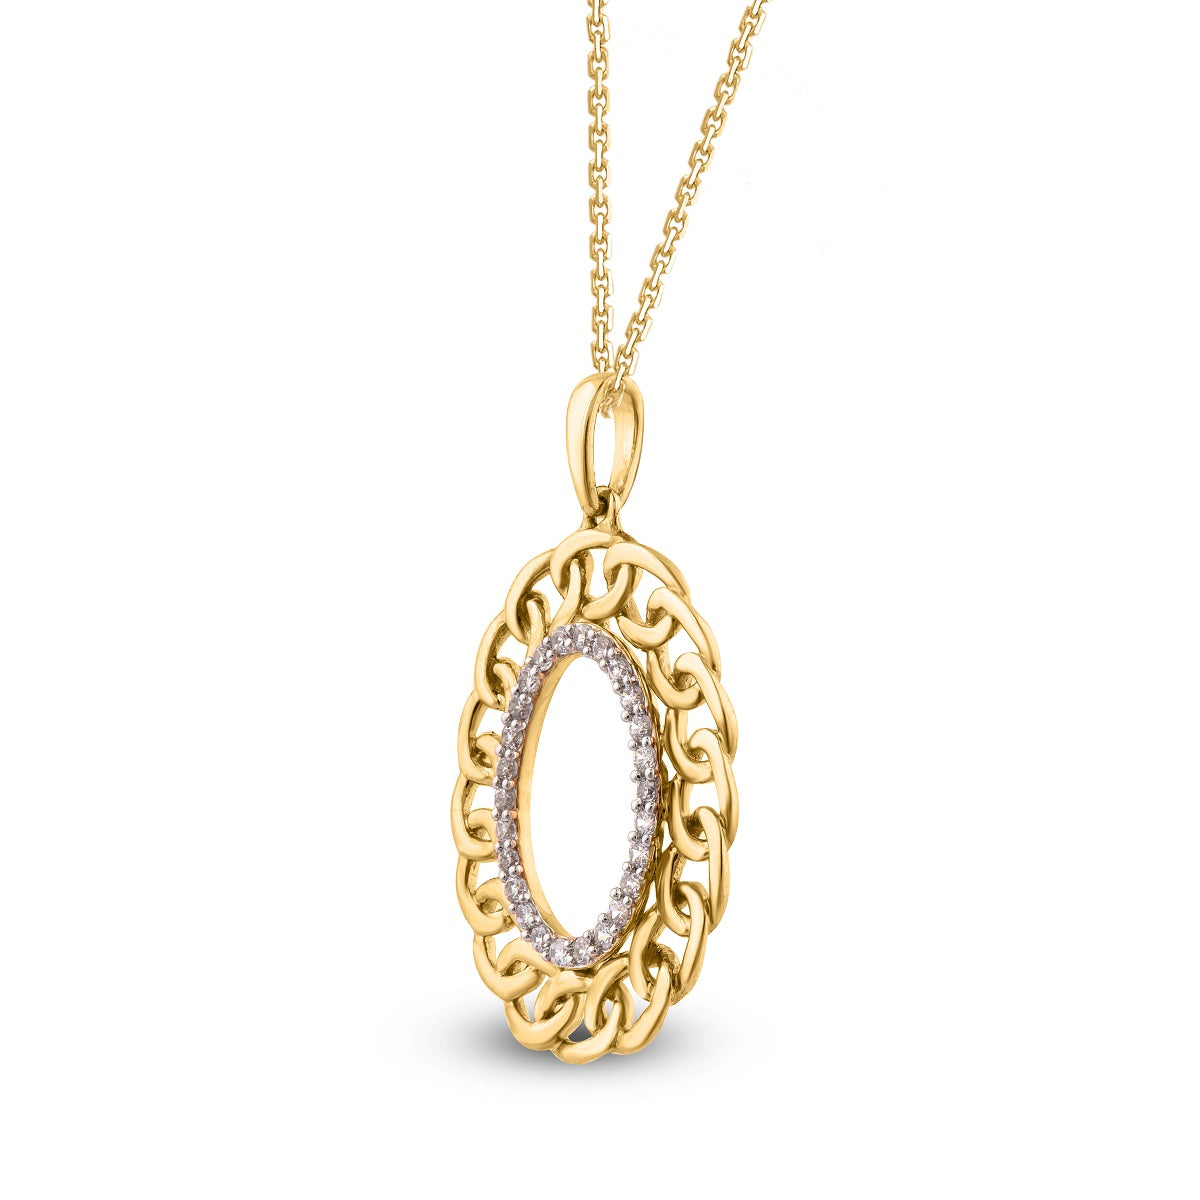 Interlocking Oval Pendant Necklace in Gold plated 925 Sterling